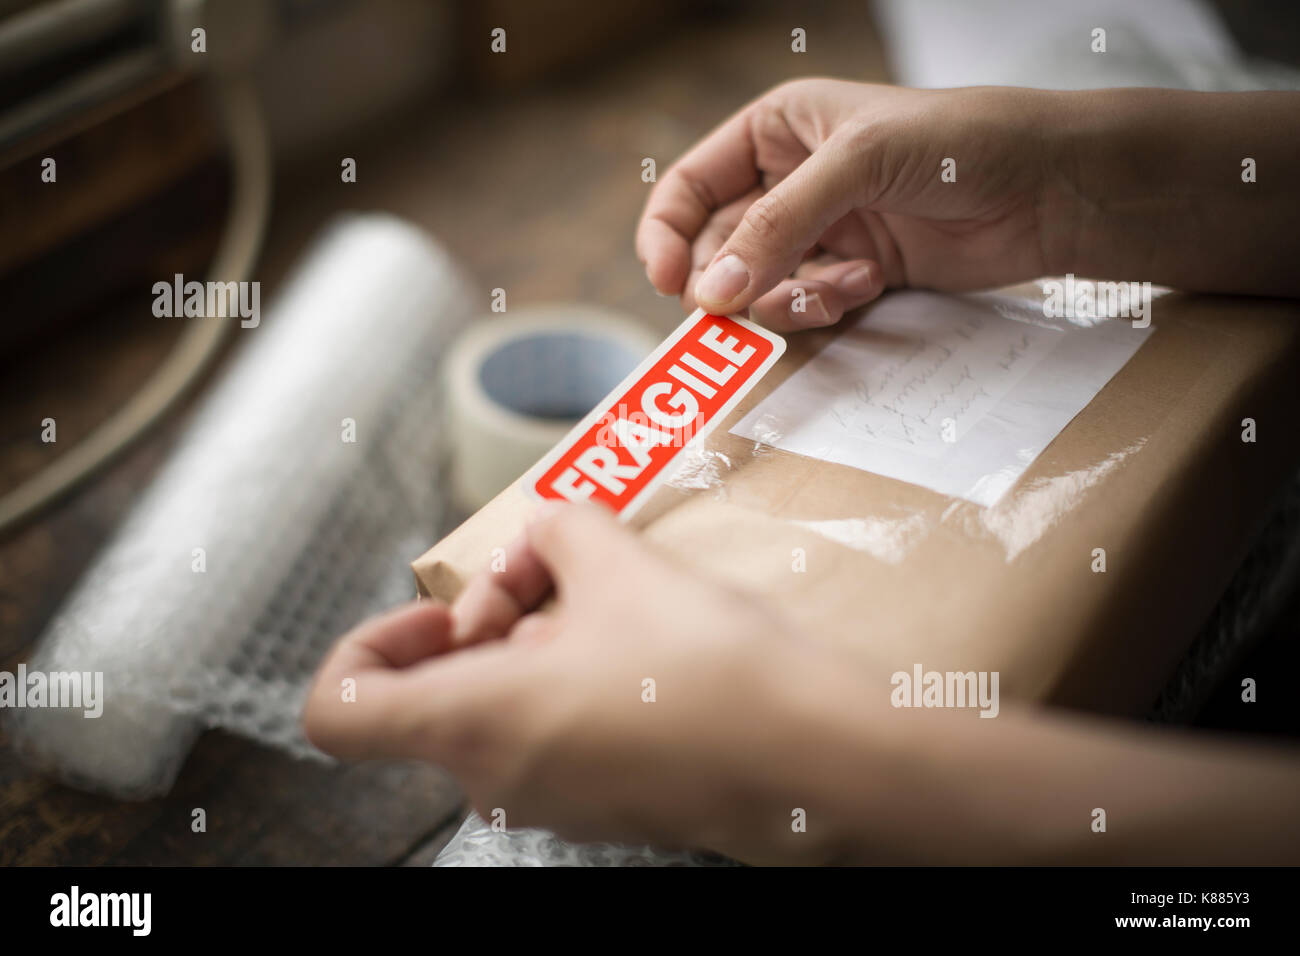 Hands holding a red Fragile sticker to stick it on a brown paper package on a work bench. Stock Photo